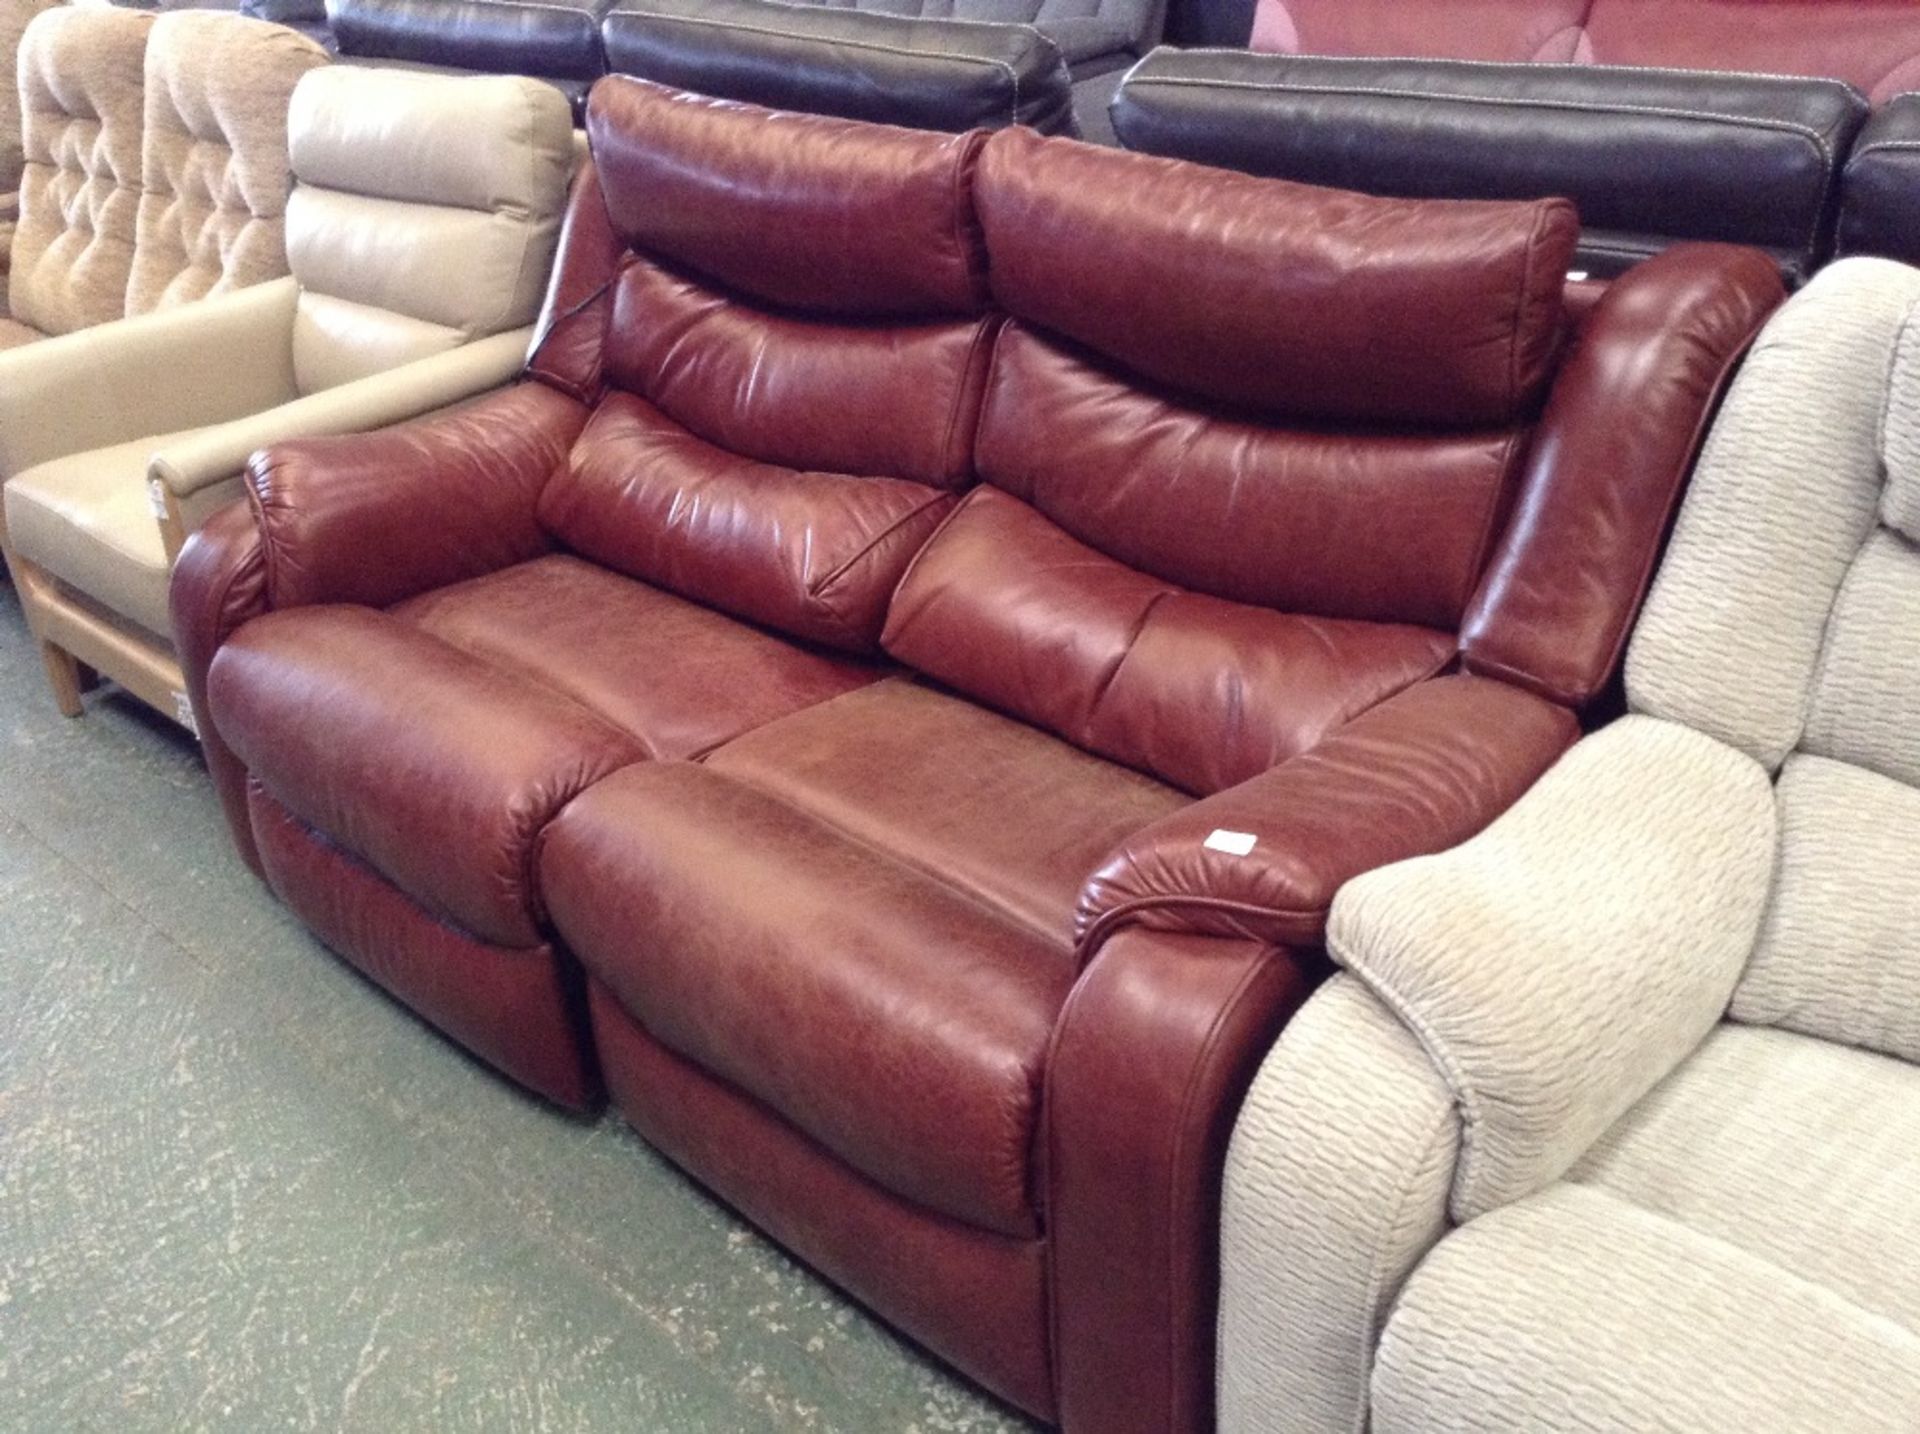 CONKER HIDE ELECTRIC RECLINING 2 SEATER SOFA (worn